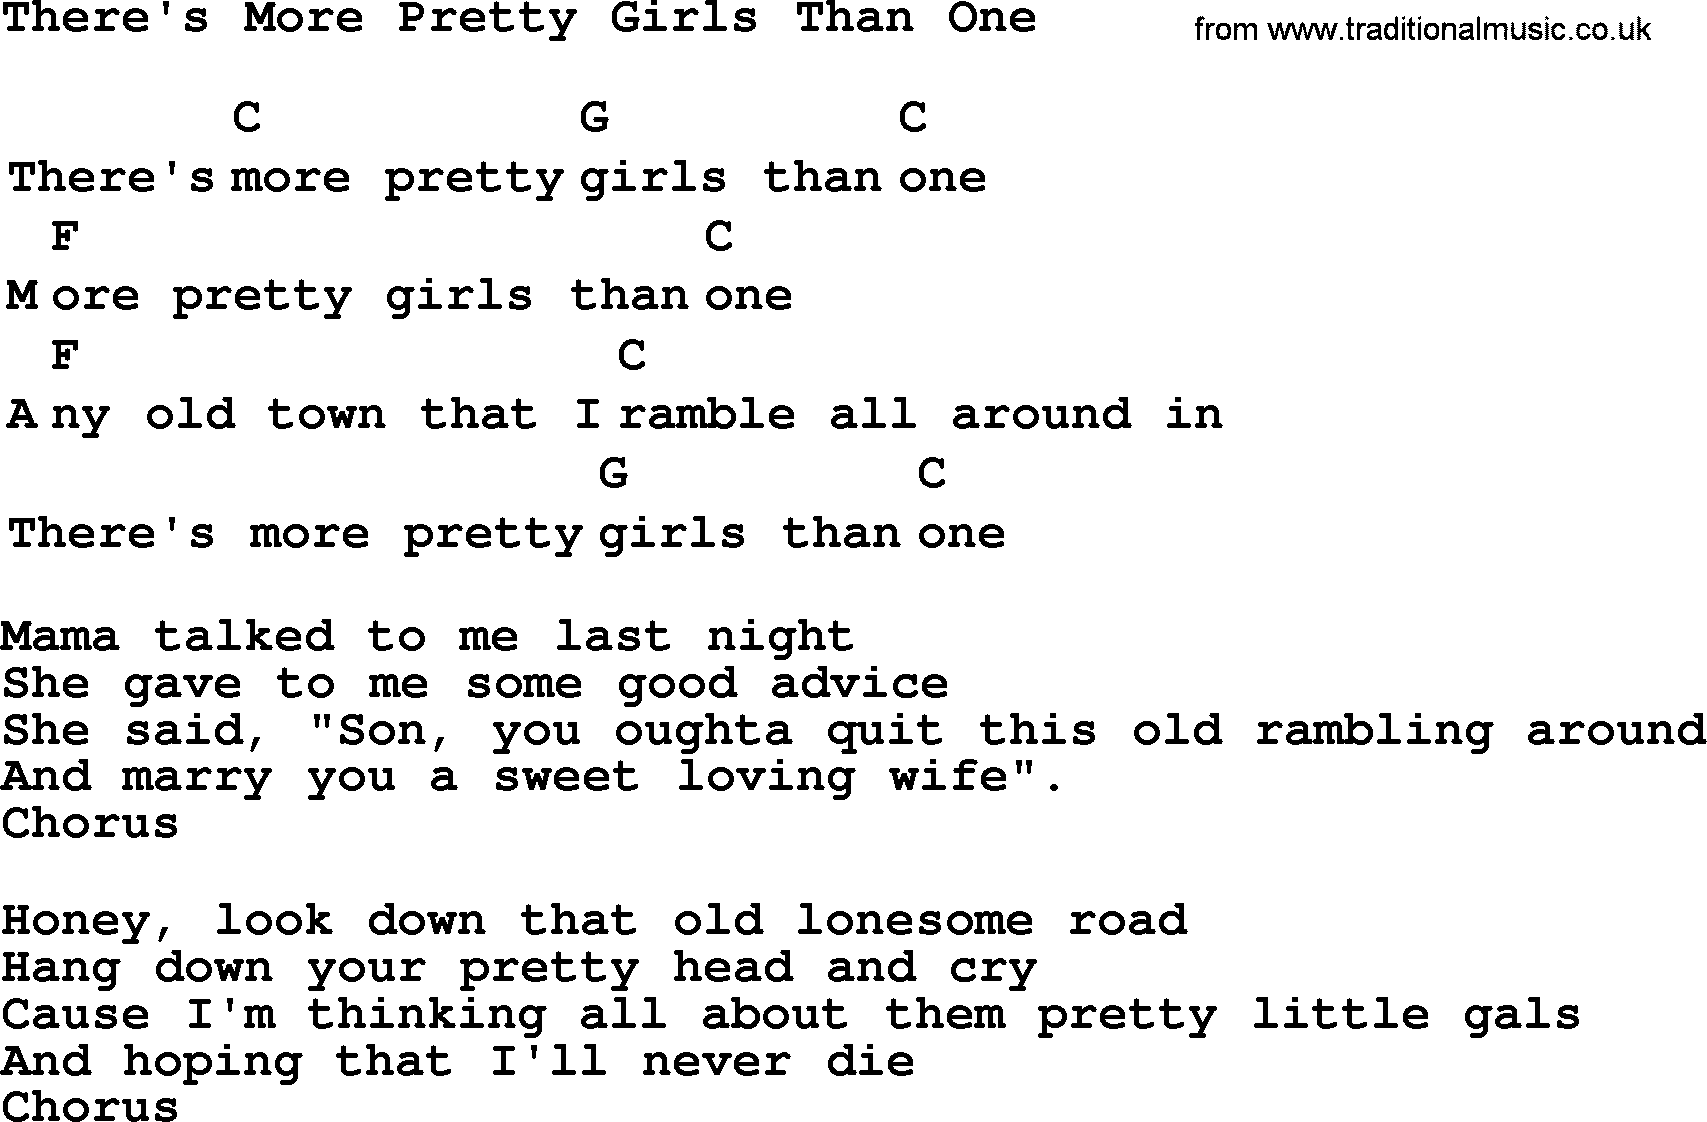 Top 1000 Most Popular Folk and Old-time Songs: Theres More Pretty Girls Than One, lyrics and chords